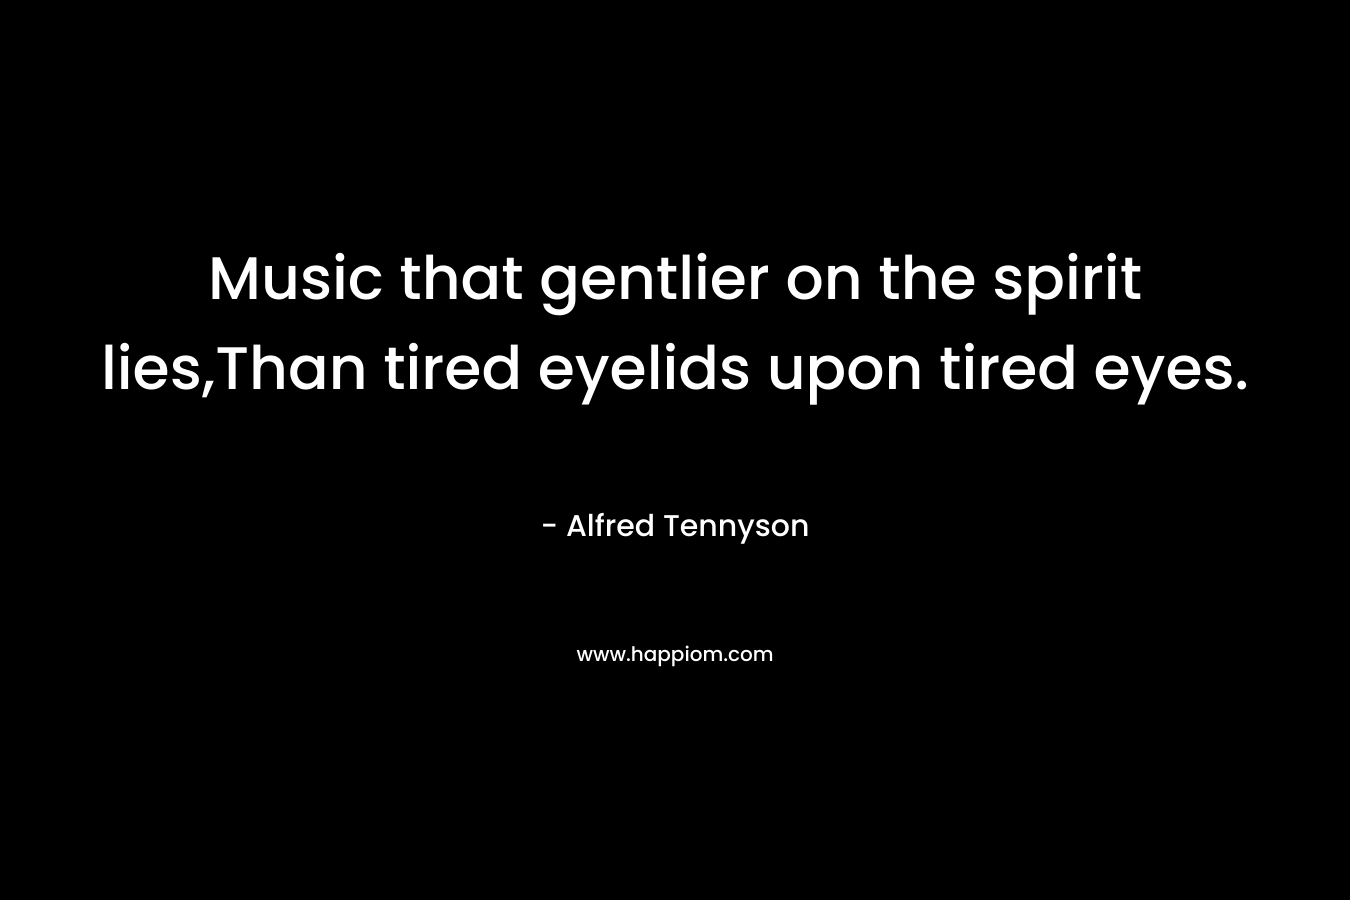 Music that gentlier on the spirit lies,Than tired eyelids upon tired eyes.